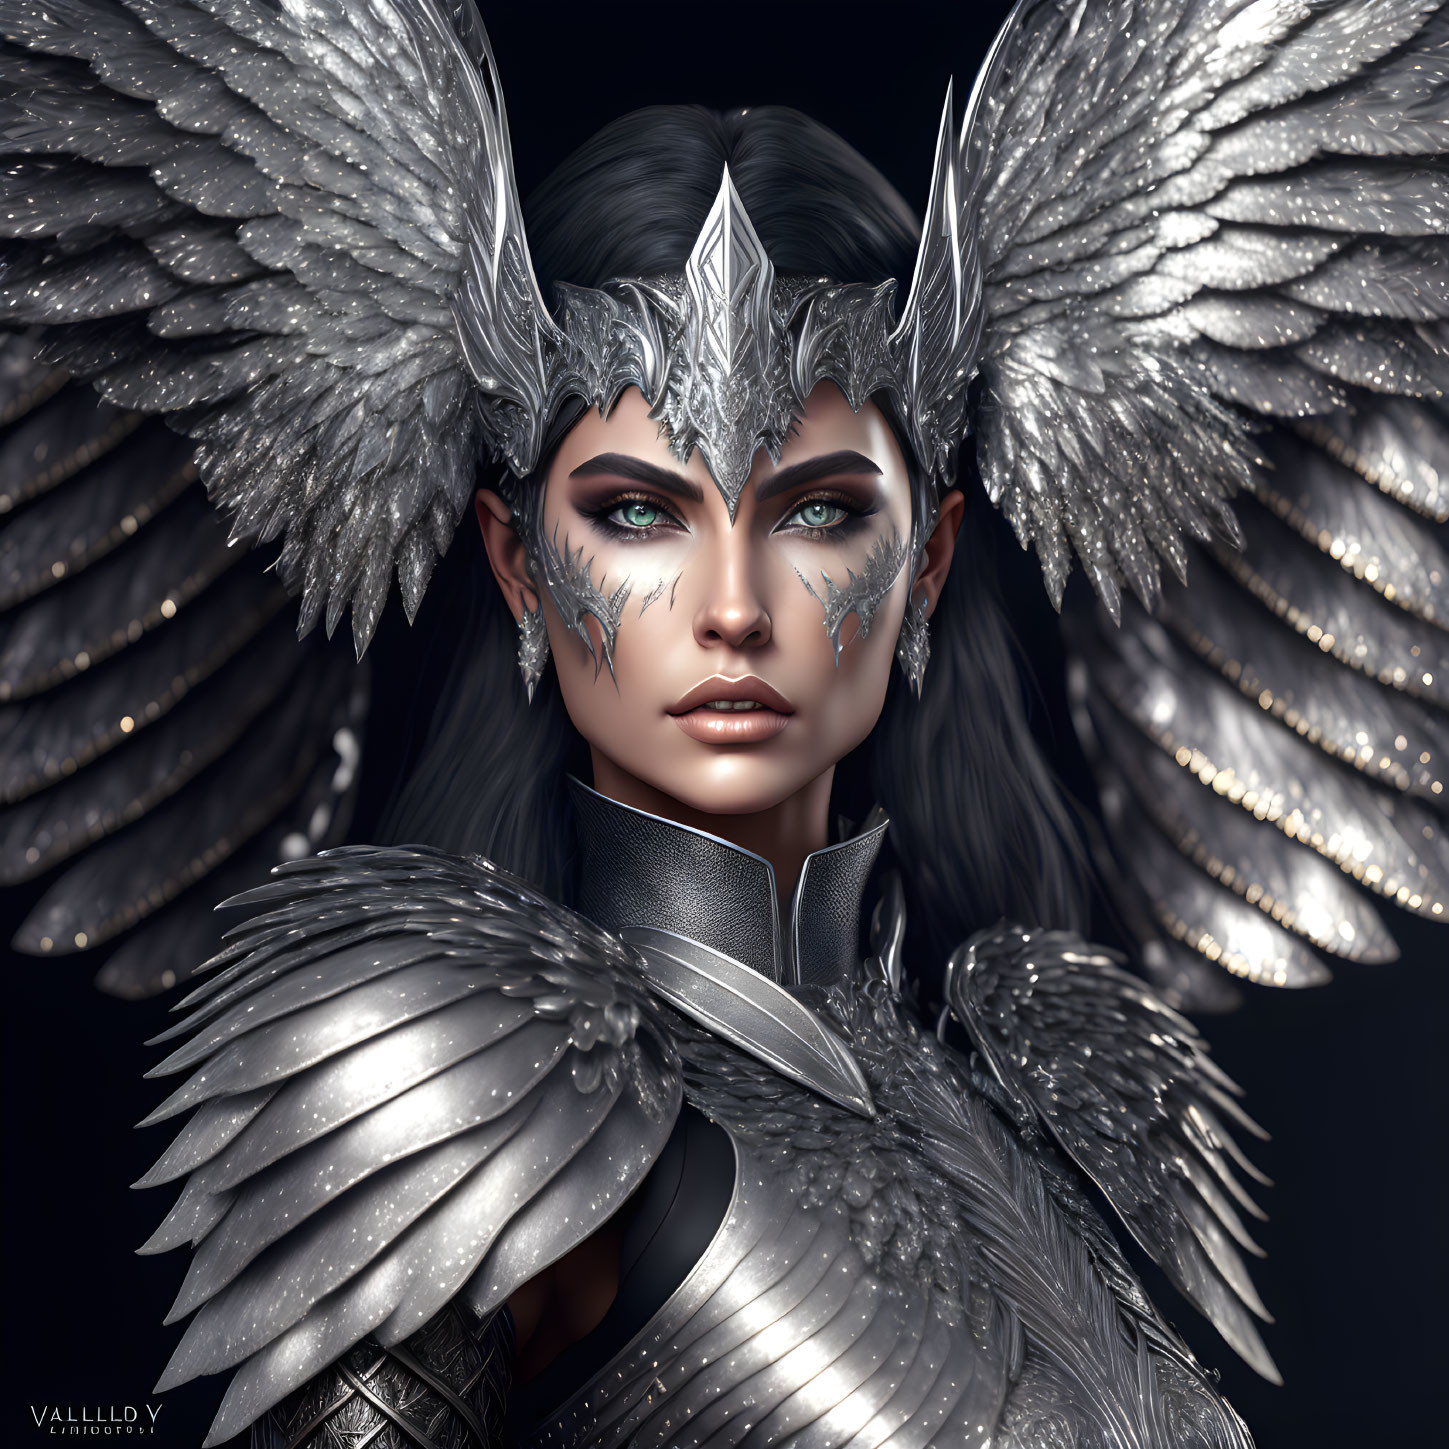 Fantasy female character with silver armor, large wings, and blue eyes on dark background